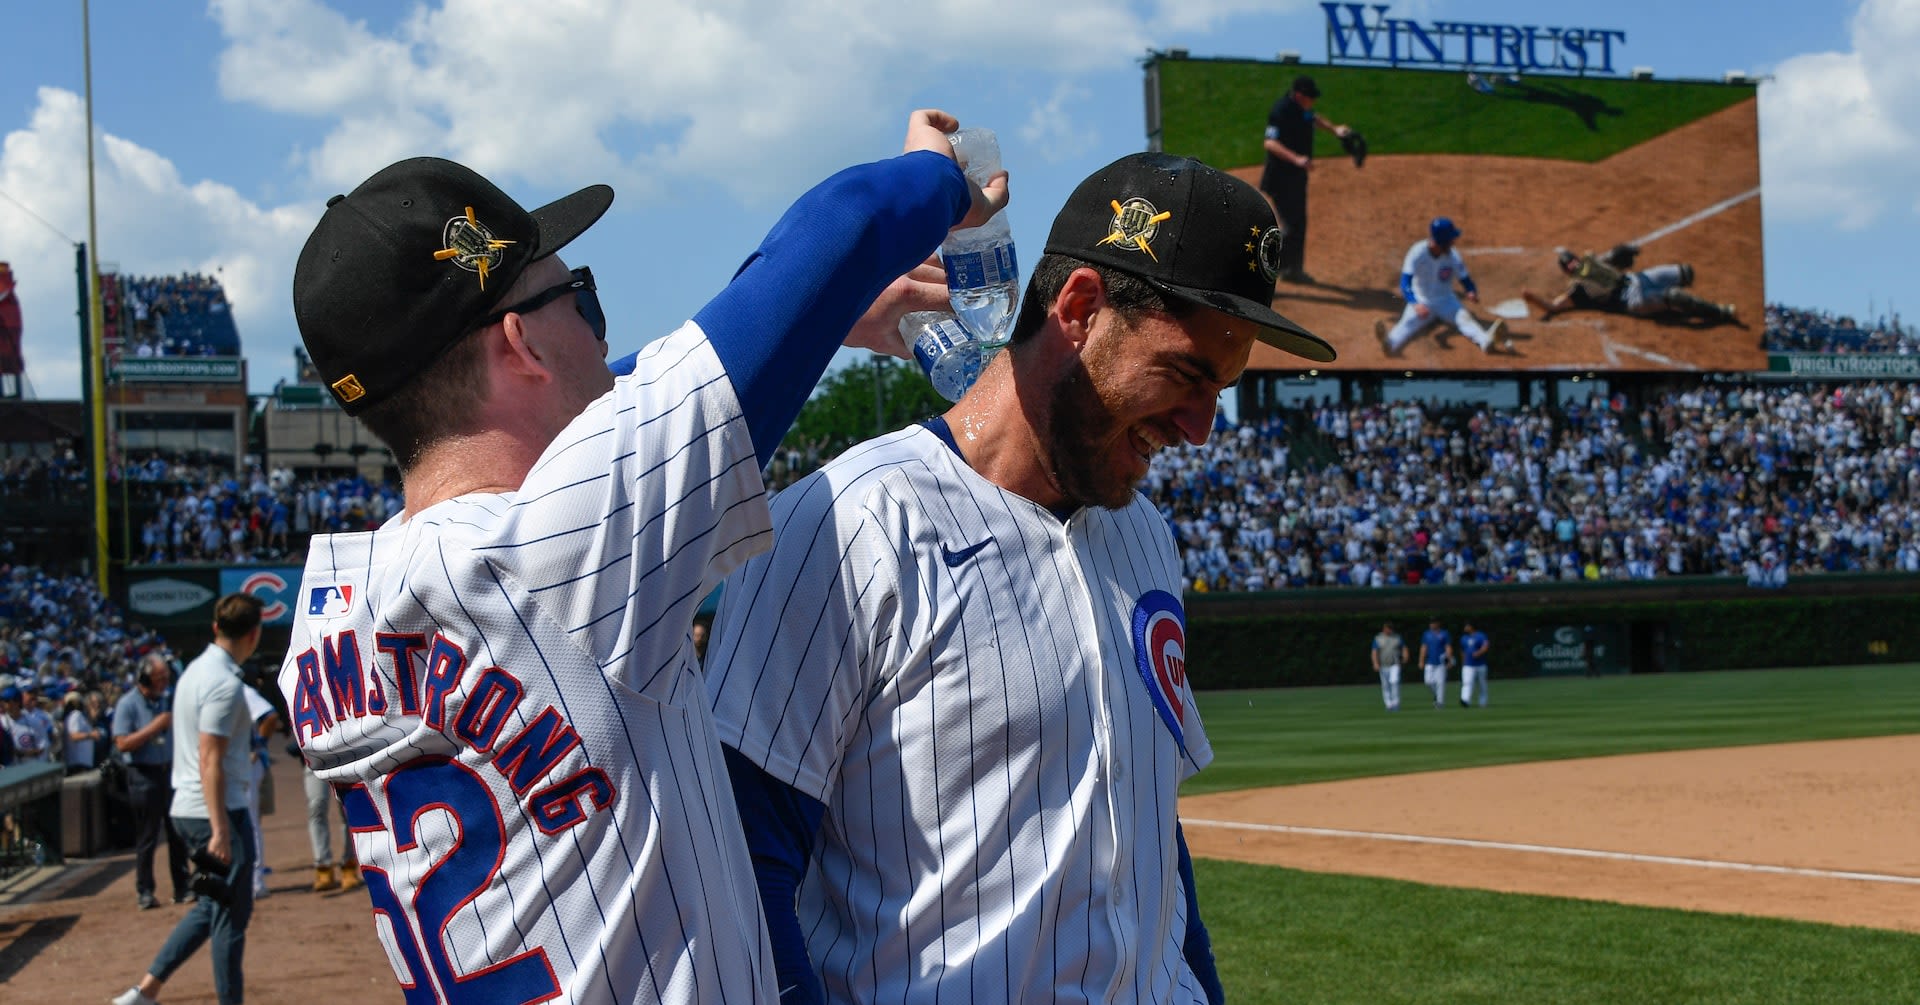 Christopher Morel’s walk-off single lifts Cubs over Pirates